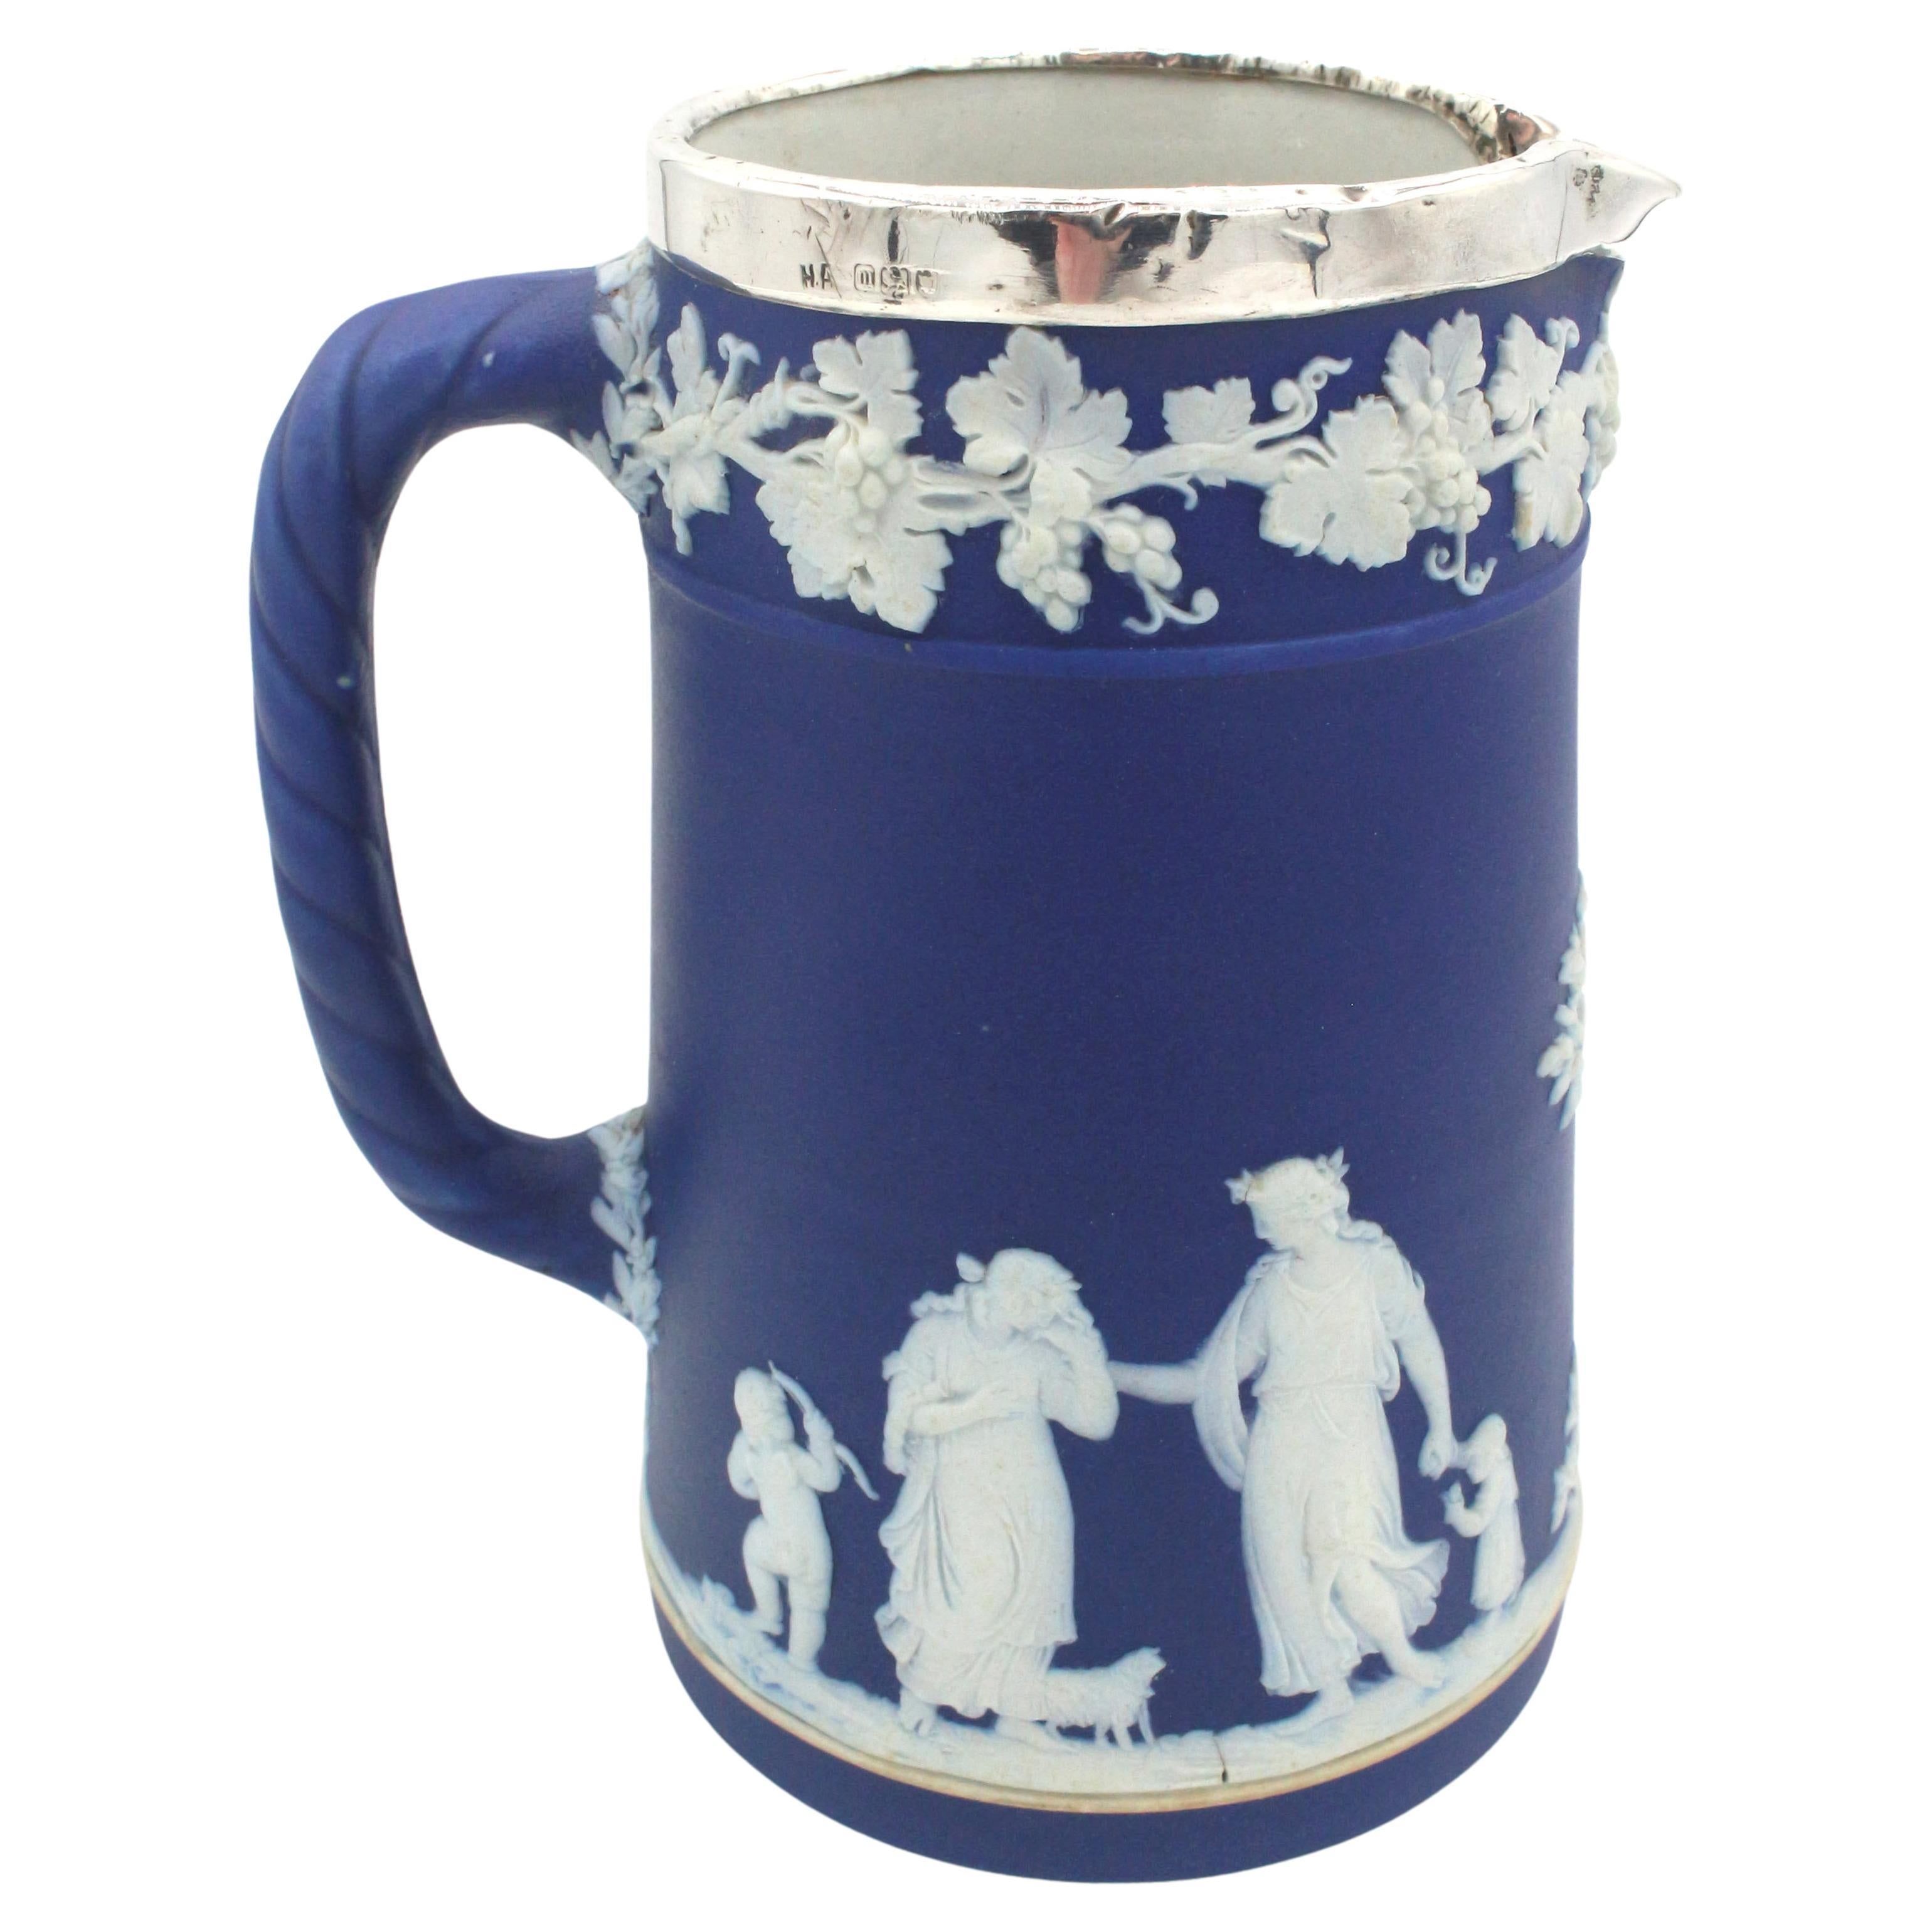  Early 20th-Century Jasperware Wedgwood Pitcher with Sterling Rim